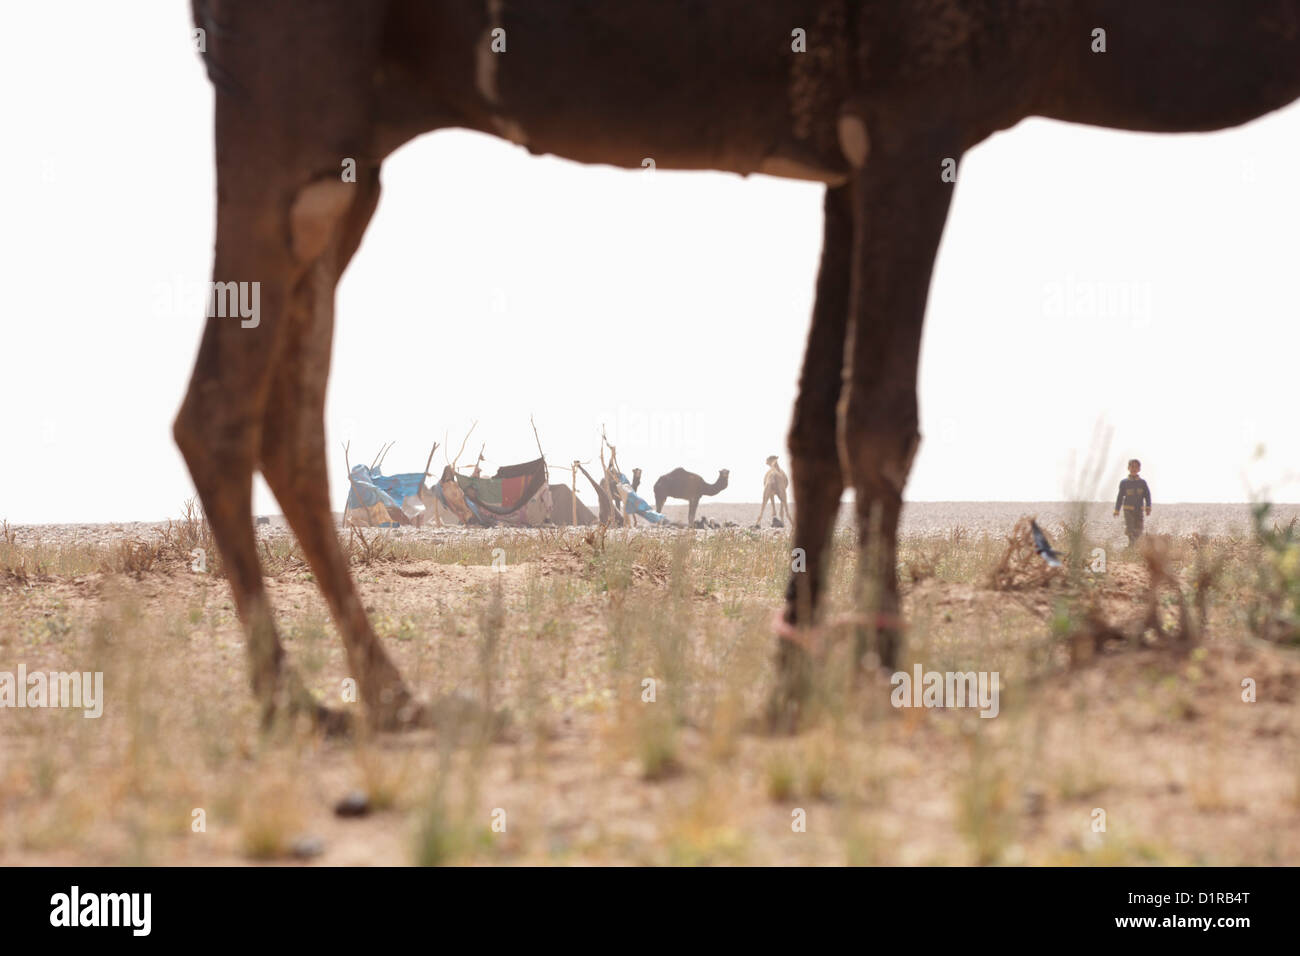 Morocco, M'Hamid, Nomad camp and camels. Stock Photo